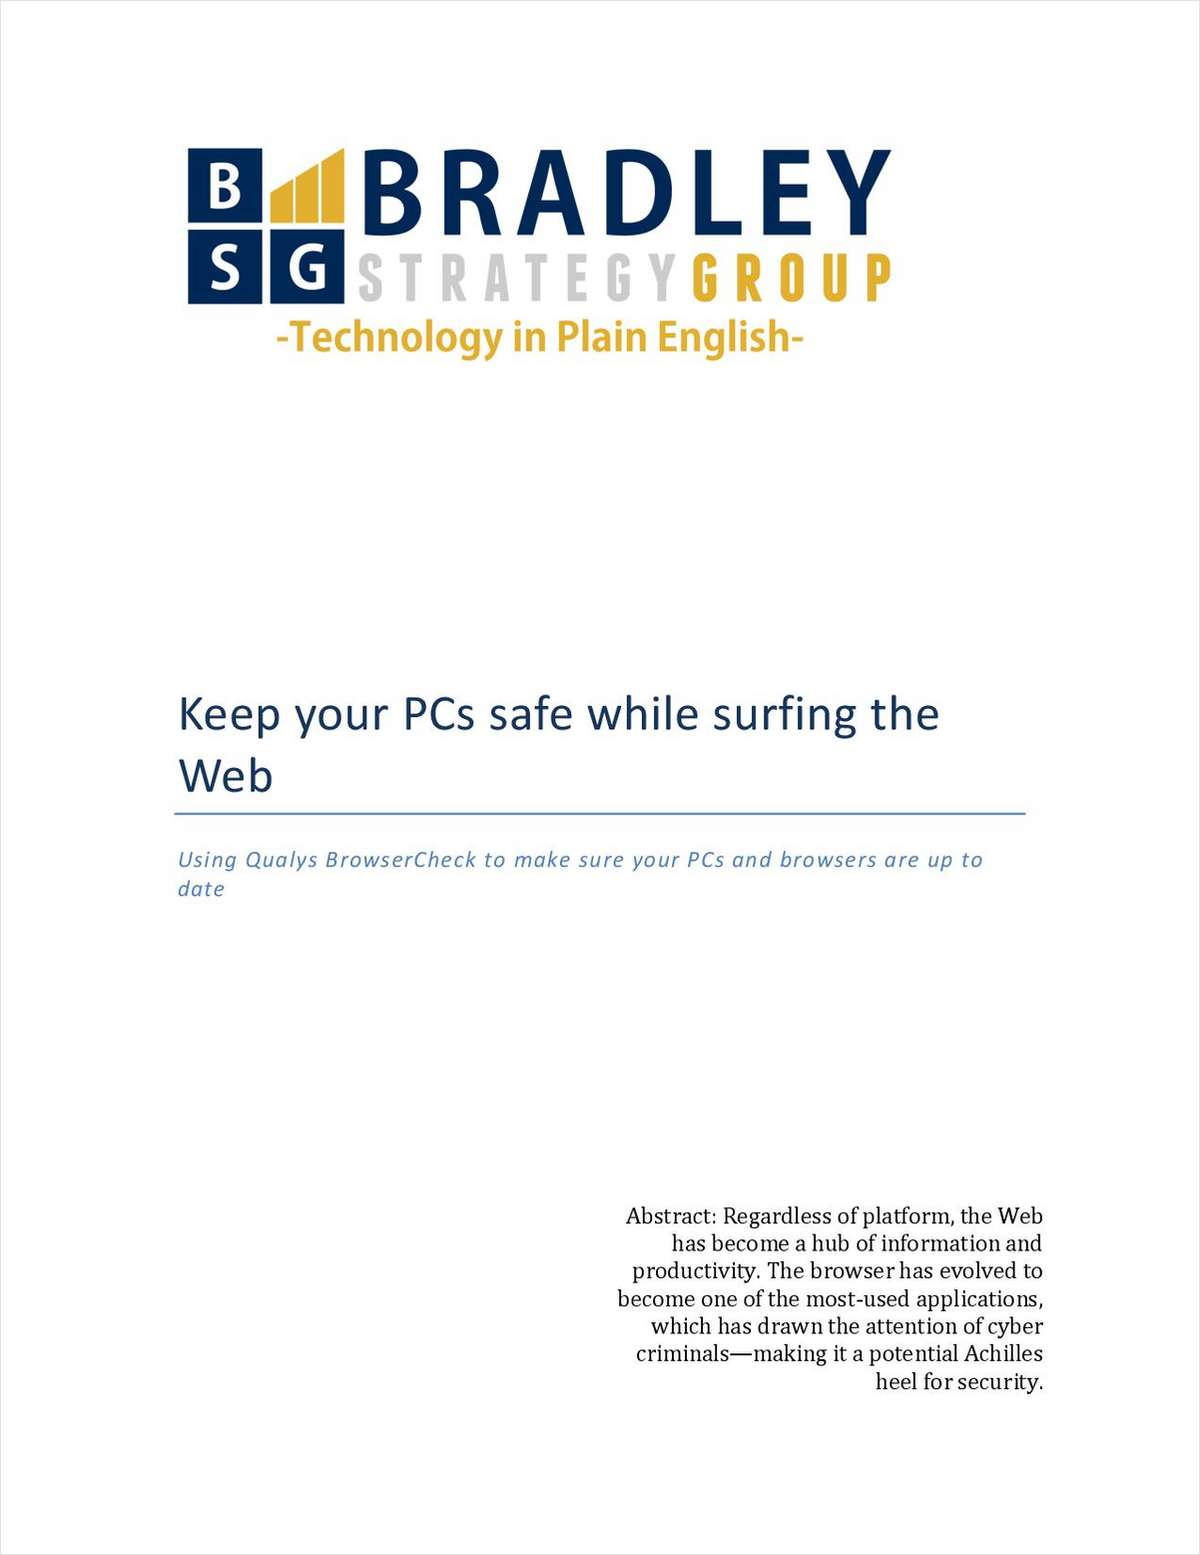 Keep Your PCs Safe while Surfing the Web